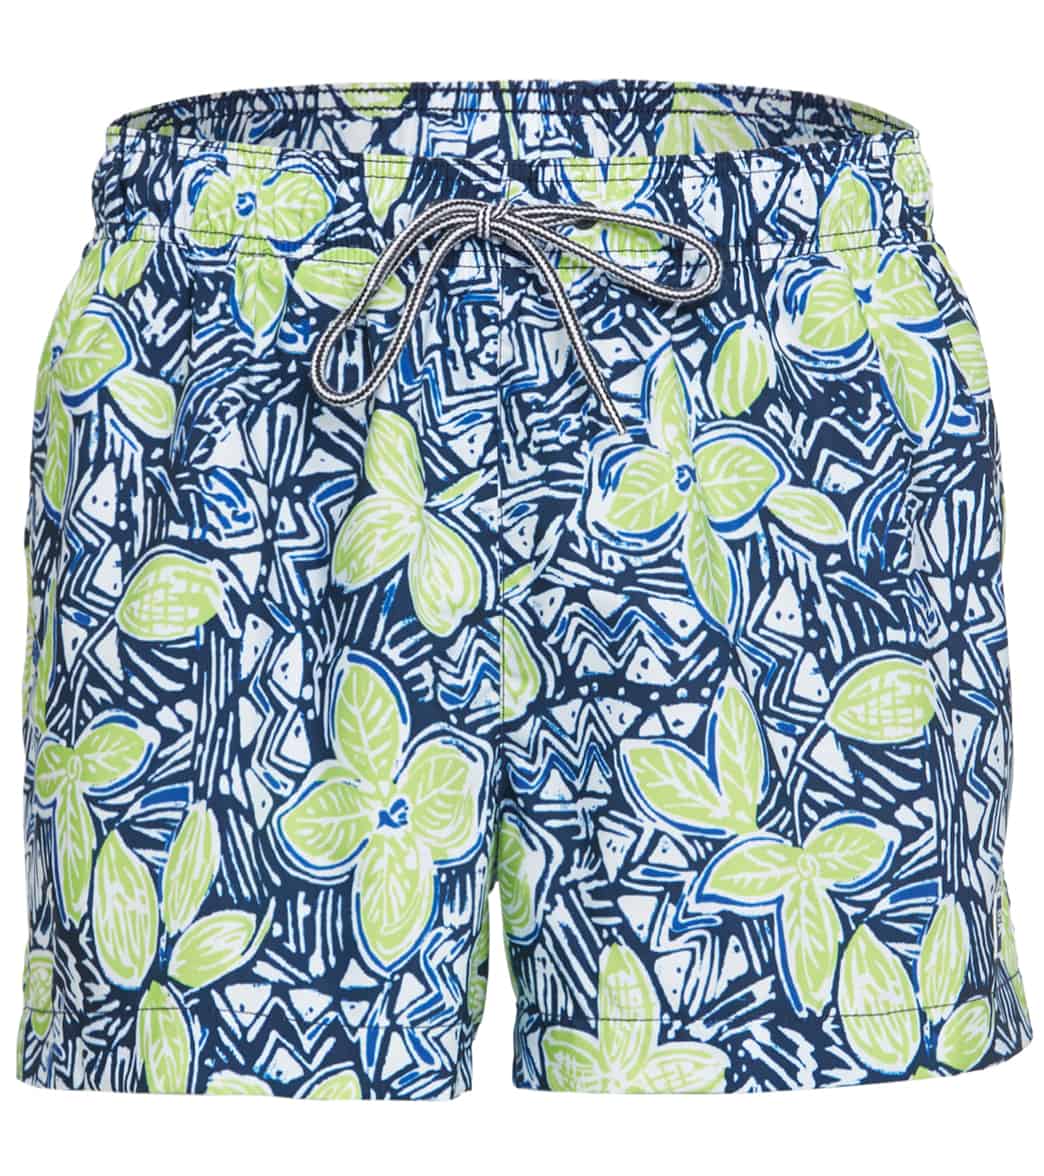 Speedo Men's 14 Active Bloom Floral Redondo Volley Short - Safety Yellow Xl Polyester - Swimoutlet.com